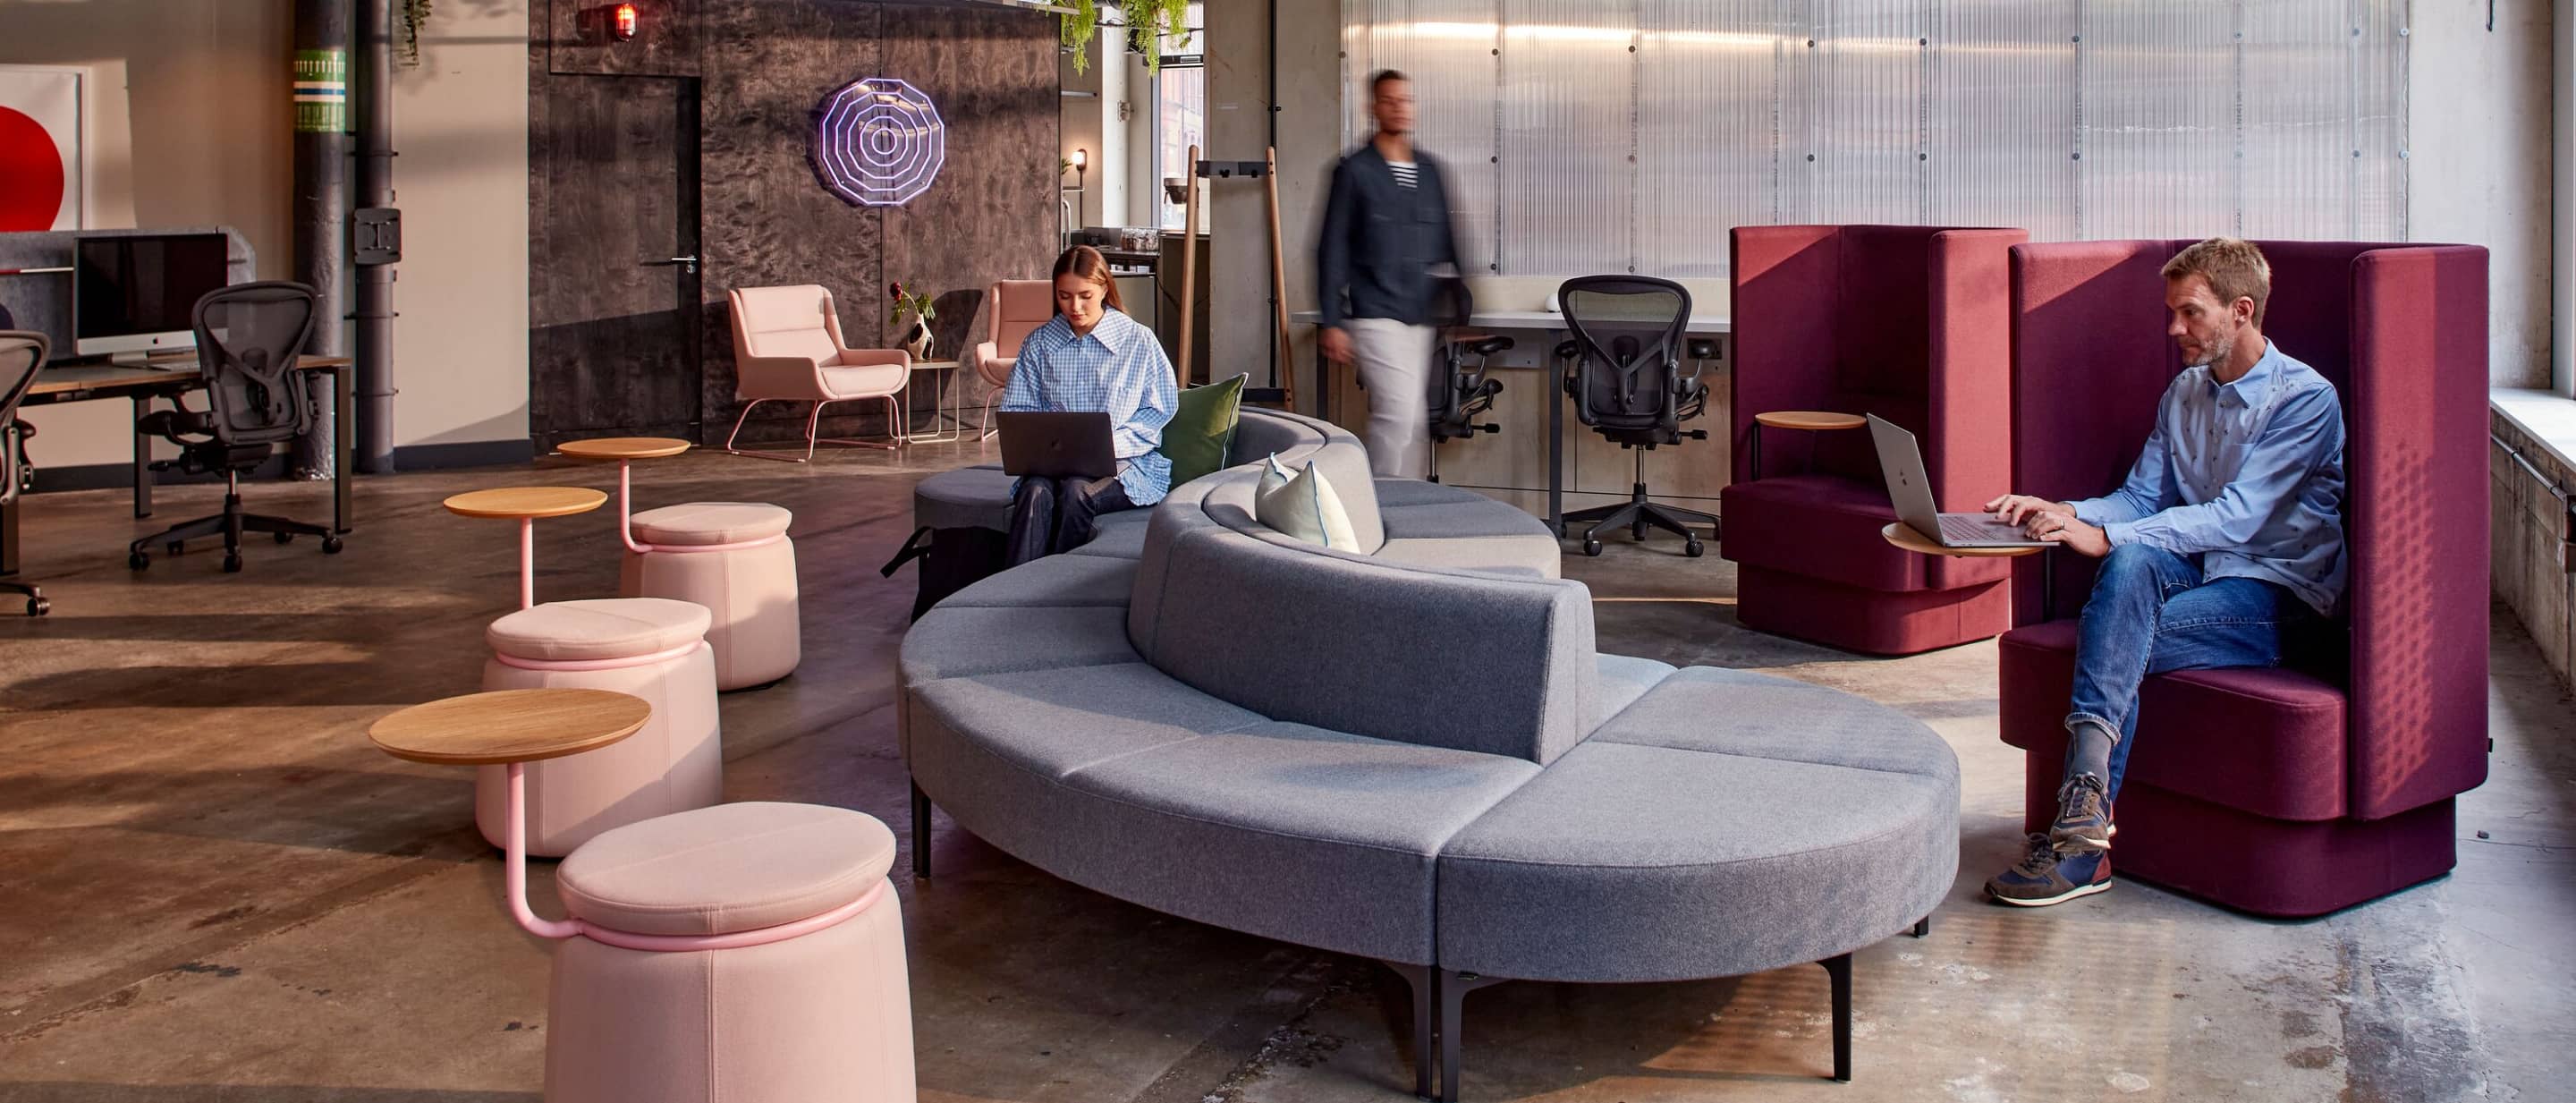 Reception area with Symbol Modular Seating, Lasso Stools and Pullman Chairs, and Aeron Chairs in the background.